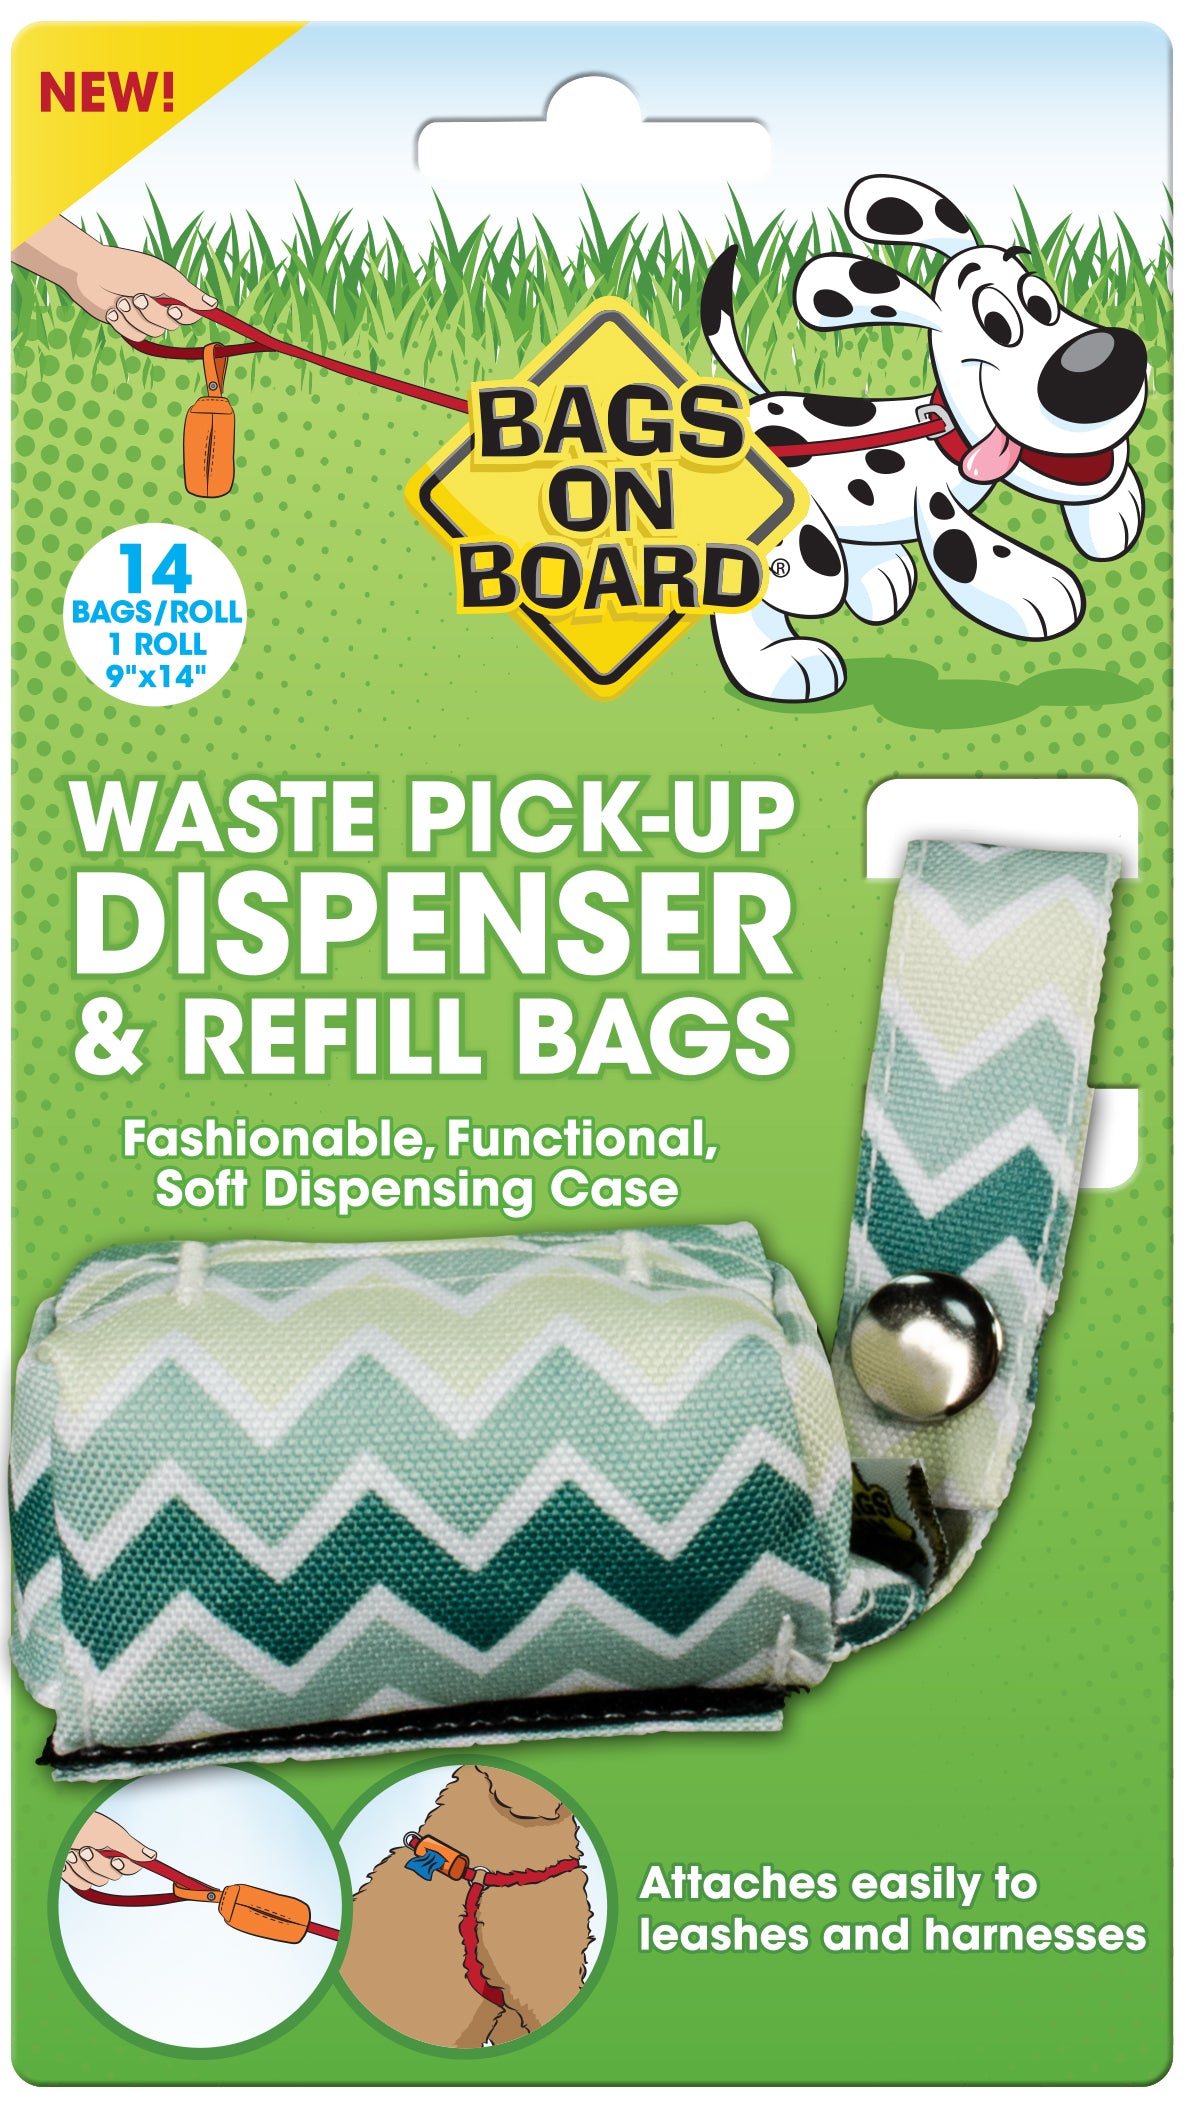 Bramton Bags On Board Fire Hydrant Doggie Bag Dispenser with Refills - 30 bags